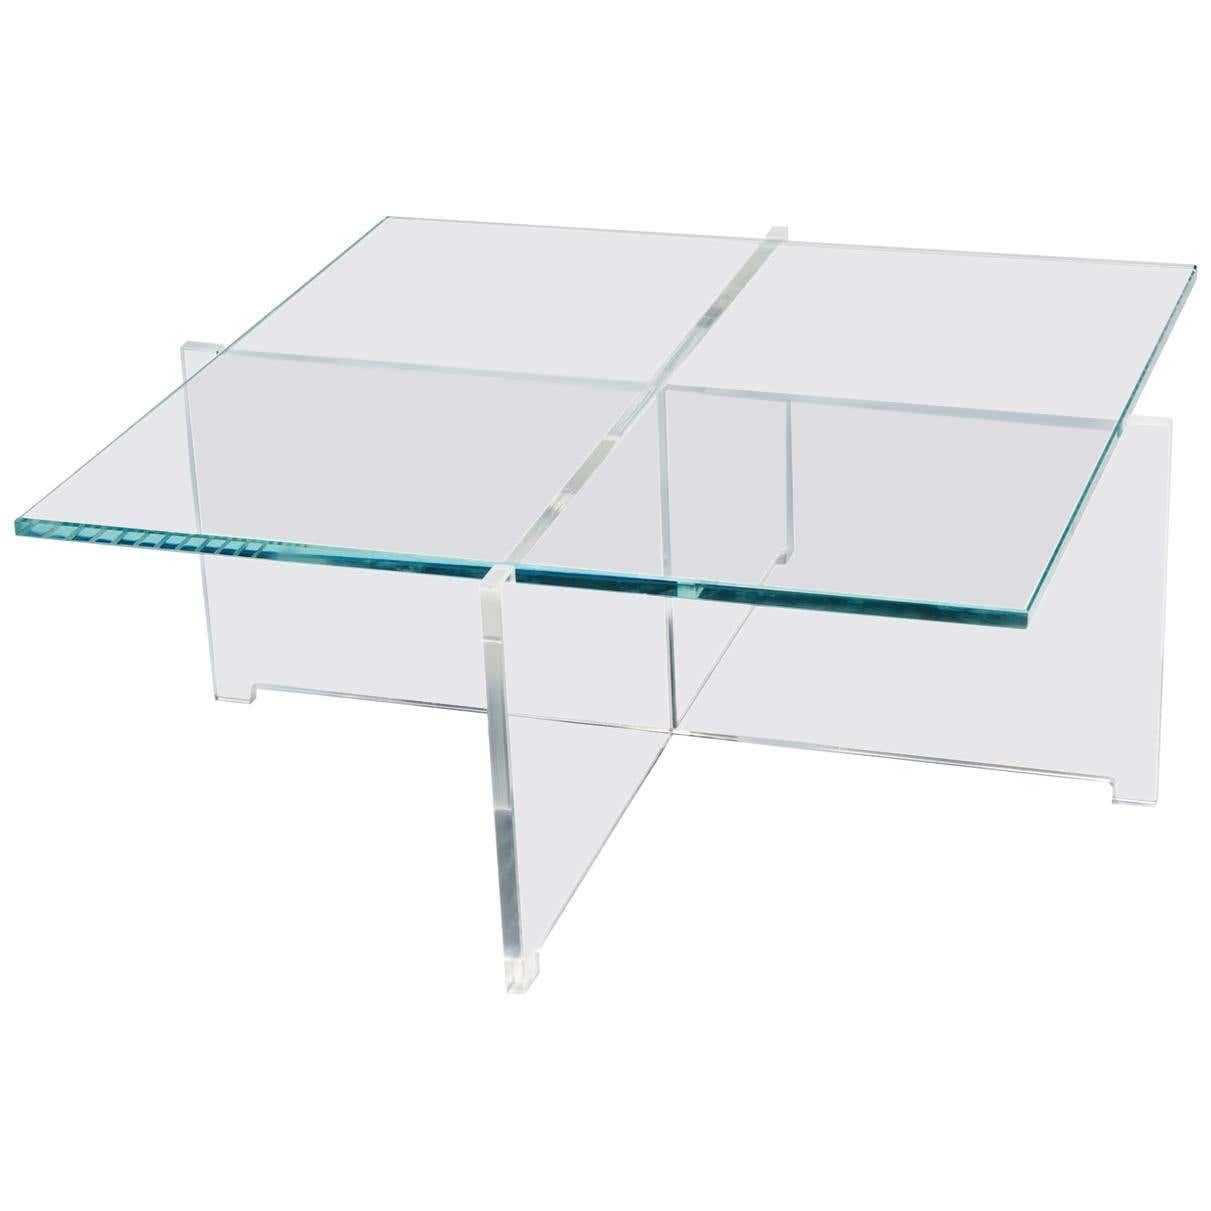 Contemporary Bodil Kjær 'Crossplex Low Table', Polycarbonate and Glass by Karakter For Sale